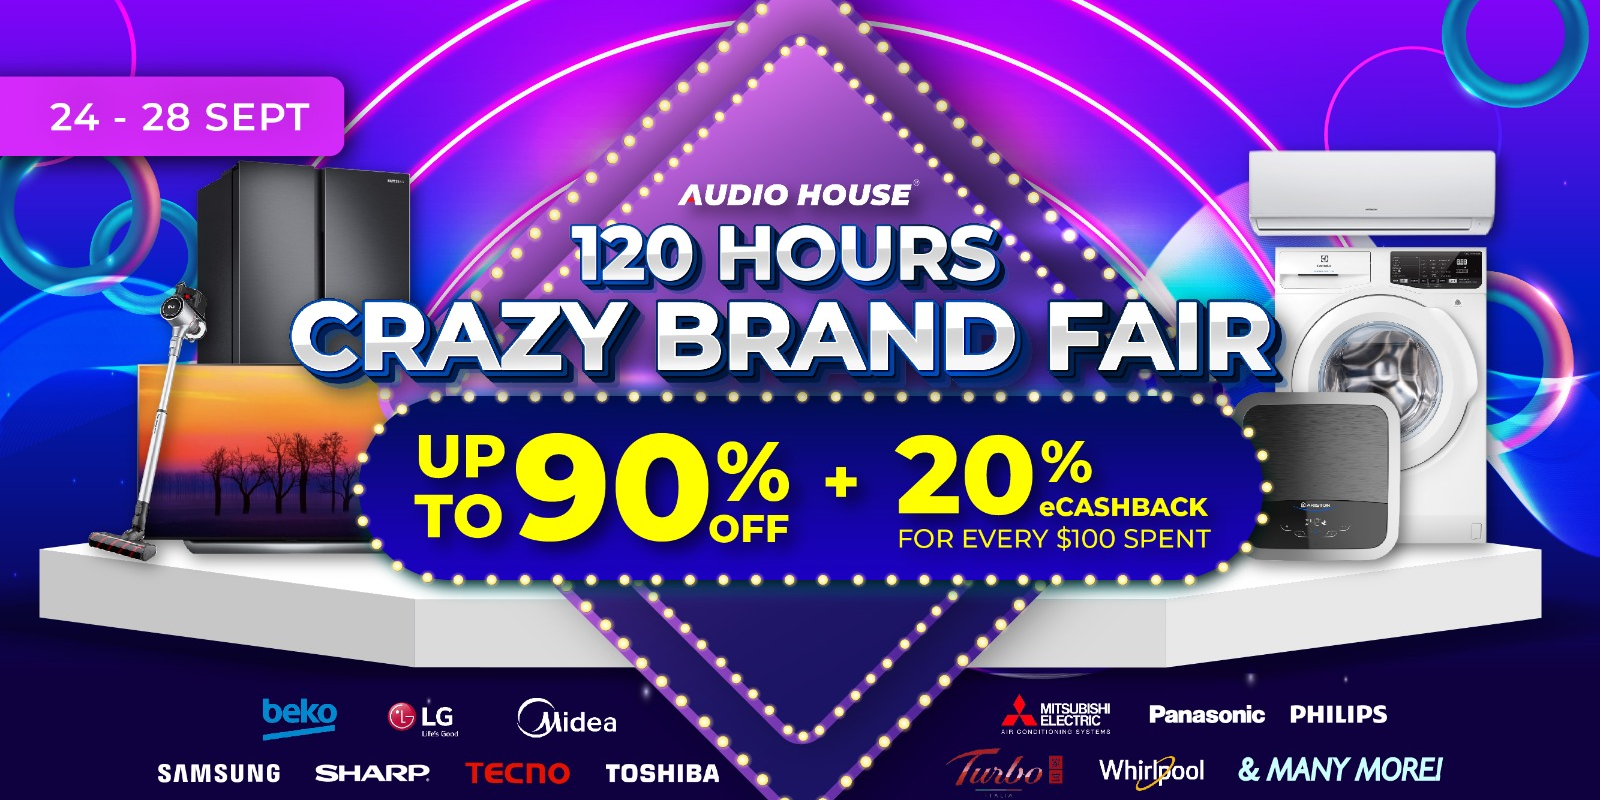 [Audio House 120 Hours Crazy Brand Fair] Up to 90% OFF + 20% eCashback For Every $100 Spent!